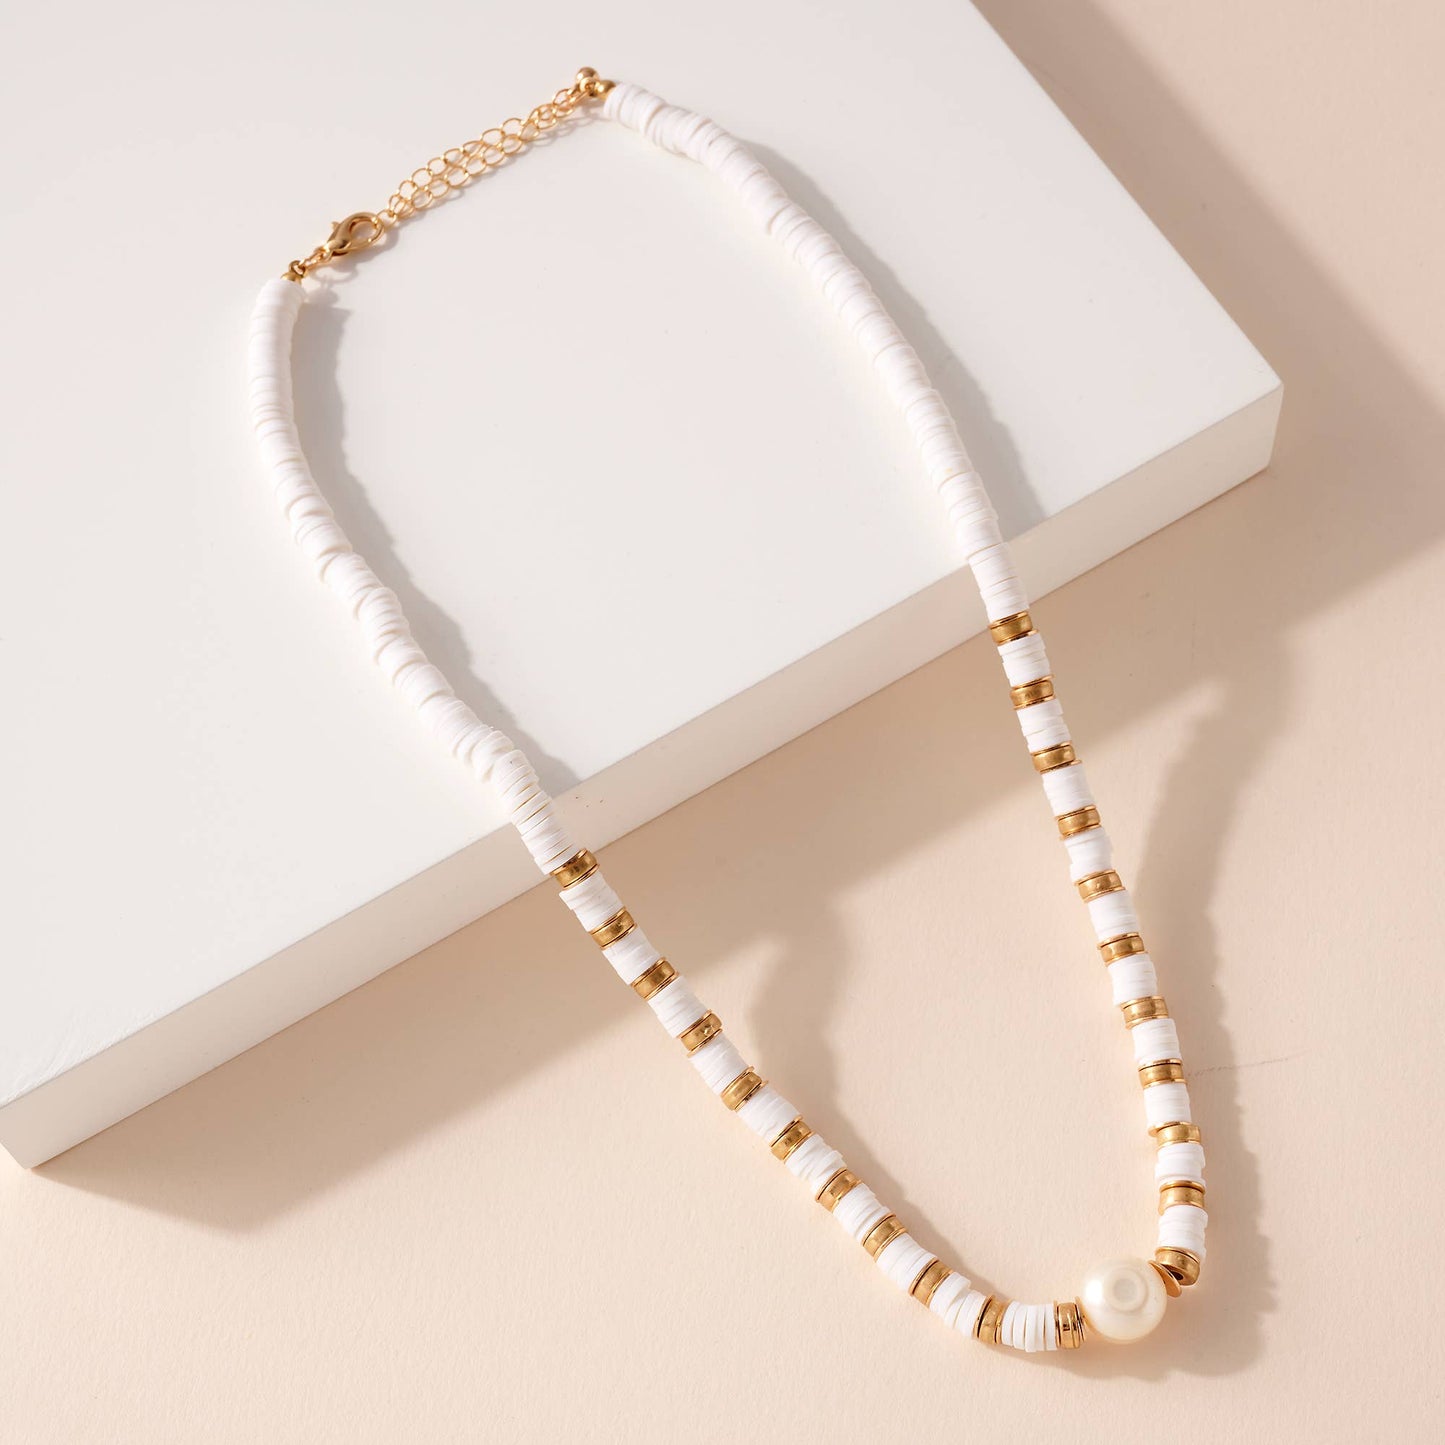 Rubber Disc Pearl Bead Necklace